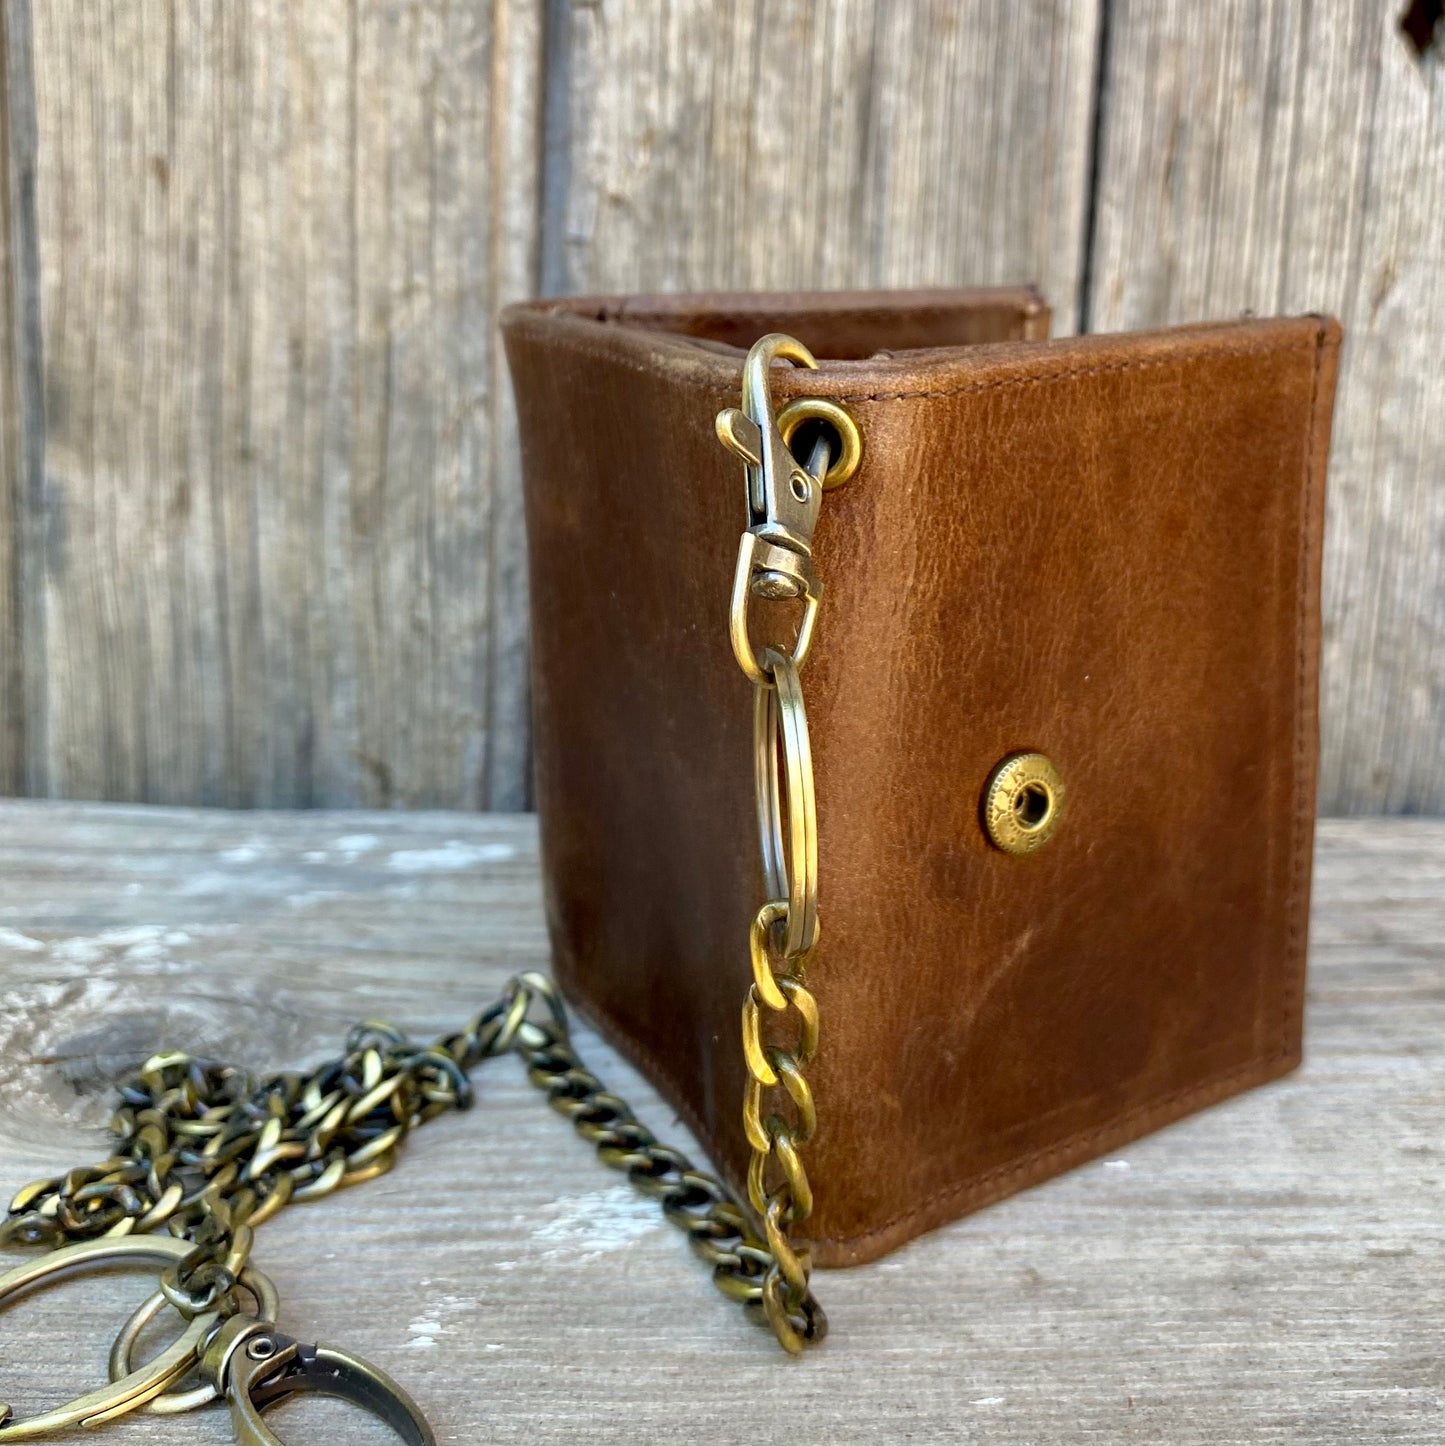 The Chain Wallet